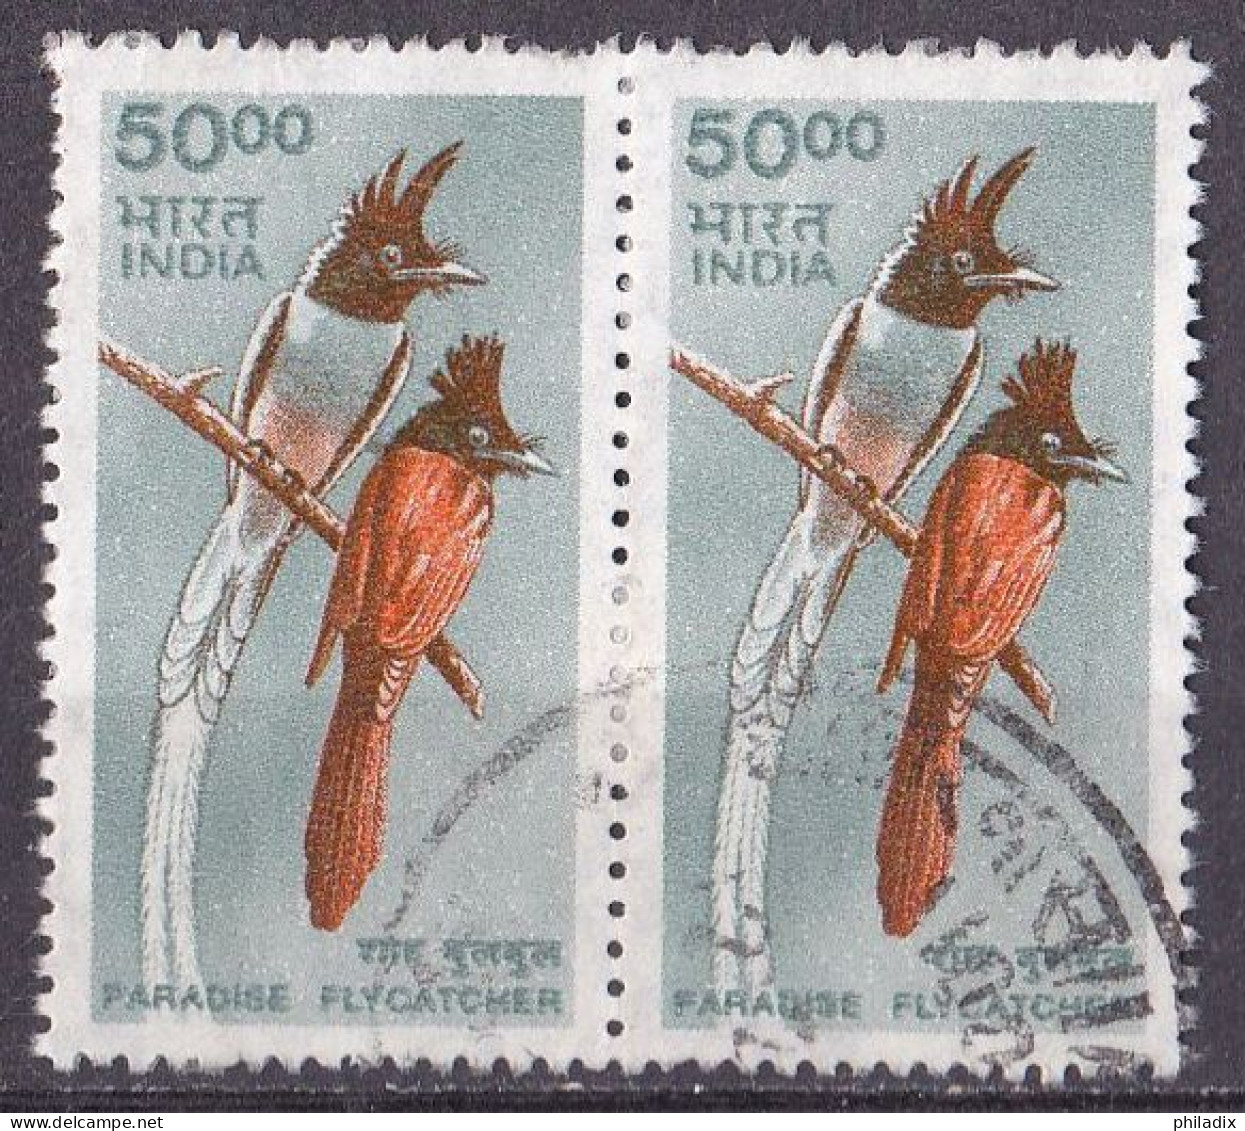 Indien Marke Von 2000 O/used (A4-14) - Used Stamps